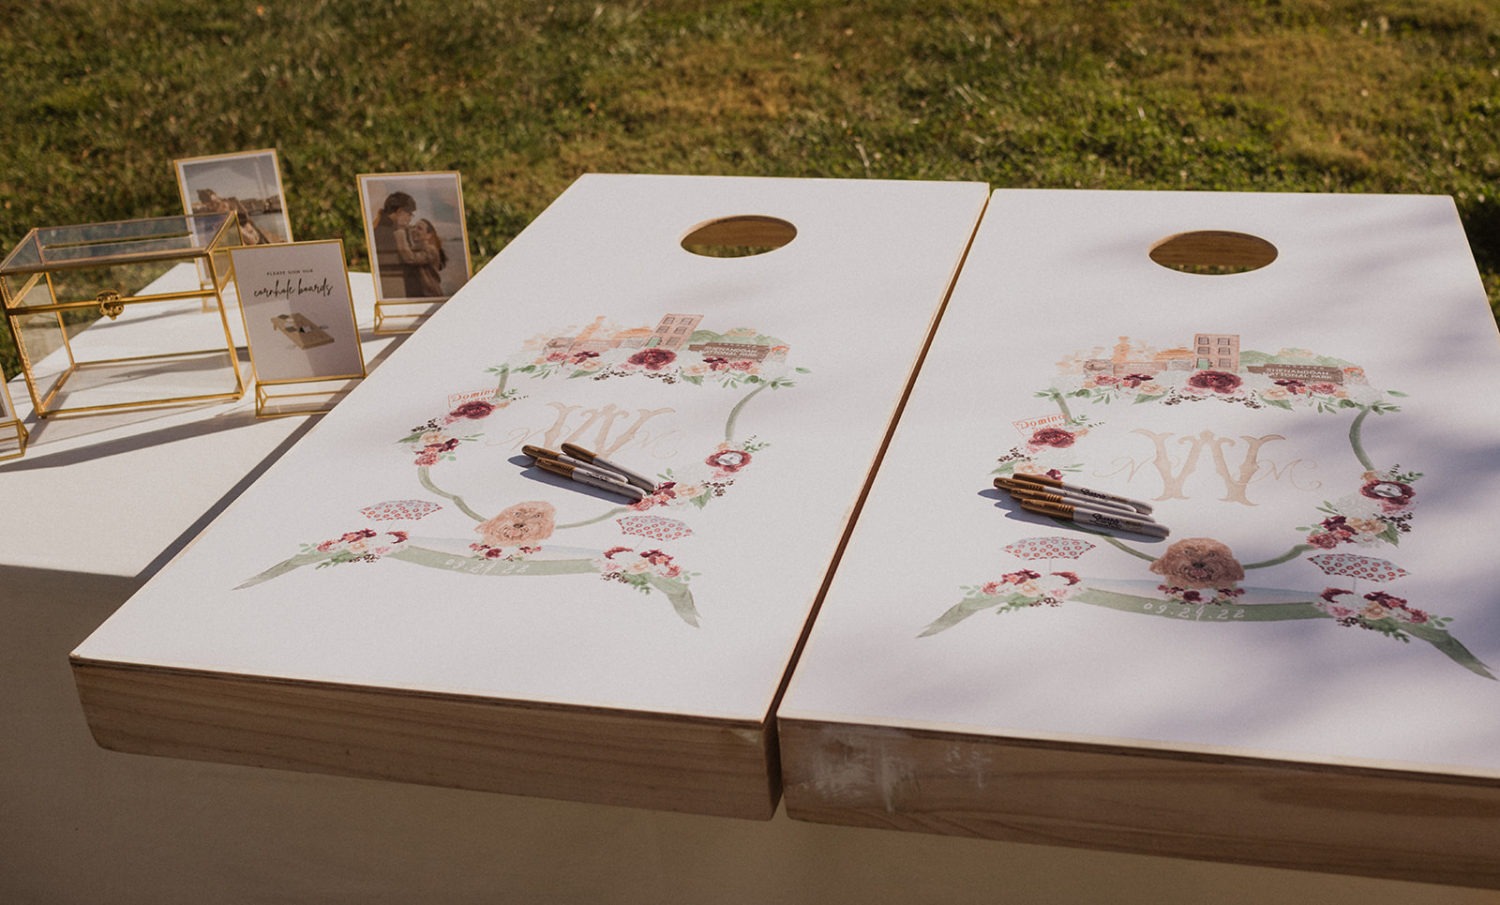 cornhole designed with wedding colors used as wedding guestbook